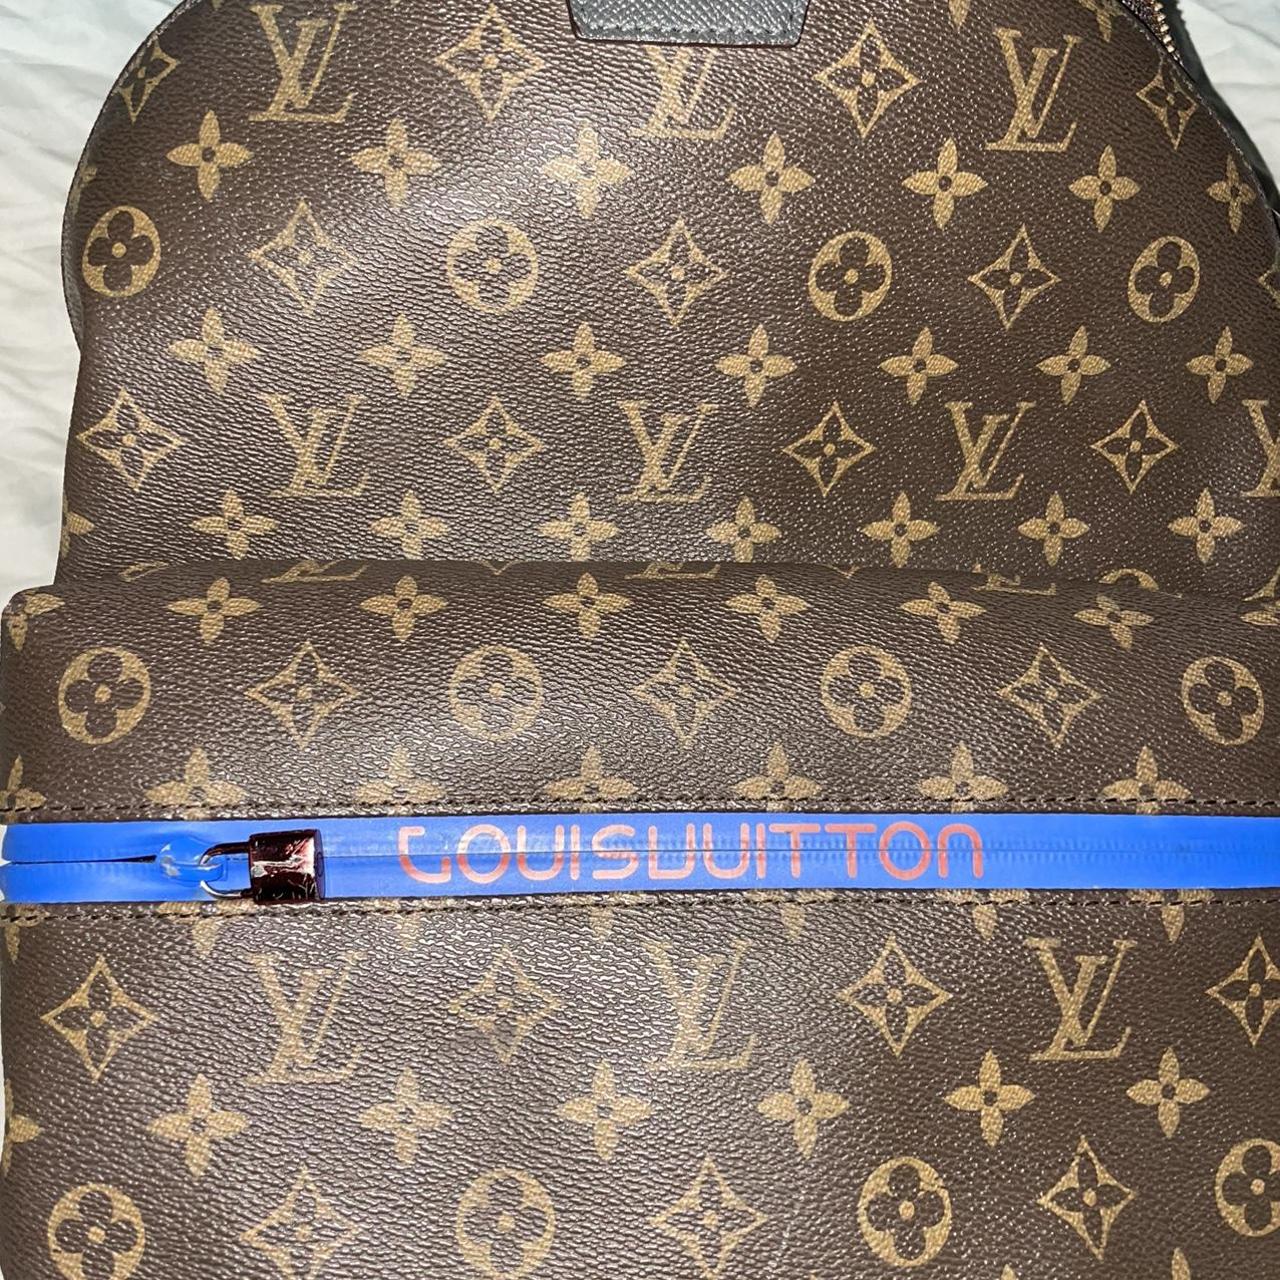 Authentic Louis Vuitton Zack backpack with proof of - Depop